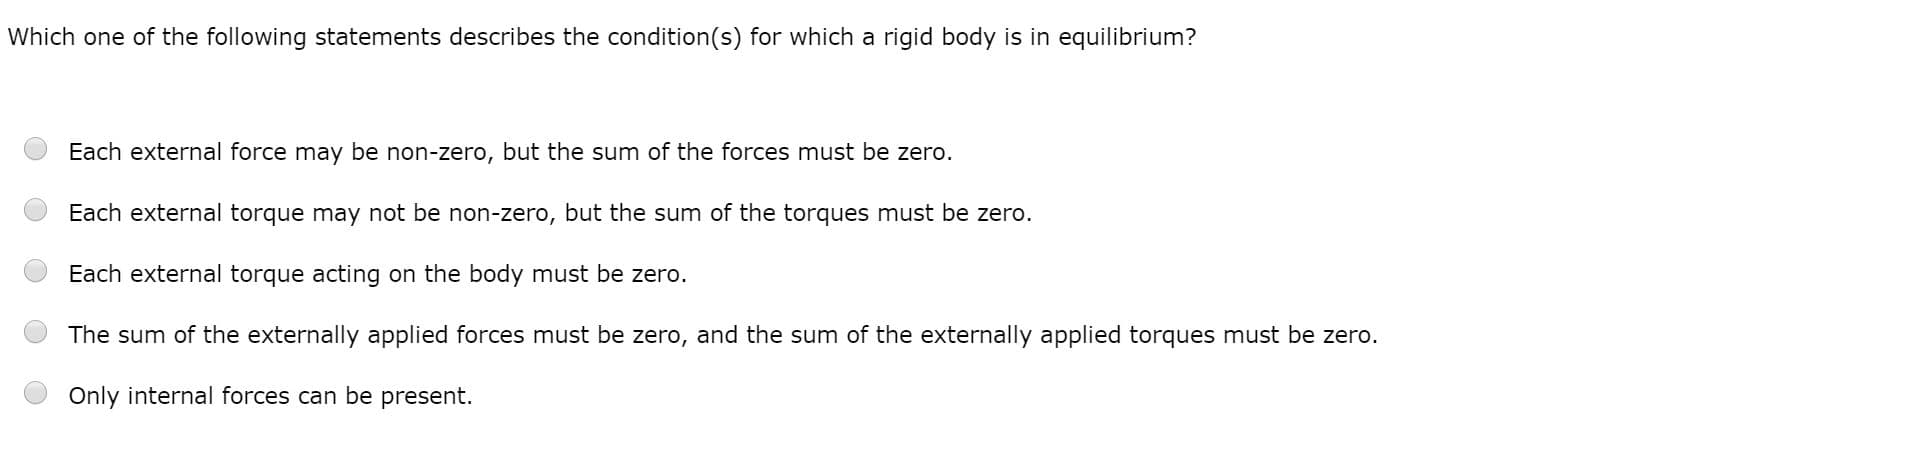 Which one of the following statements describes the condition(s) for which a rigid body is in equilibrium?
Each external force may be non-zero, but the sum of the forces must be zero.
Each external torque may not be non-zero, but the sum of the torques must be zero.
Each external torque acting on the body must be zero.
The sum of the externally applied forces must be zero, and the sum of the externally applied torques must be zero.
Only internal forces can be present.
